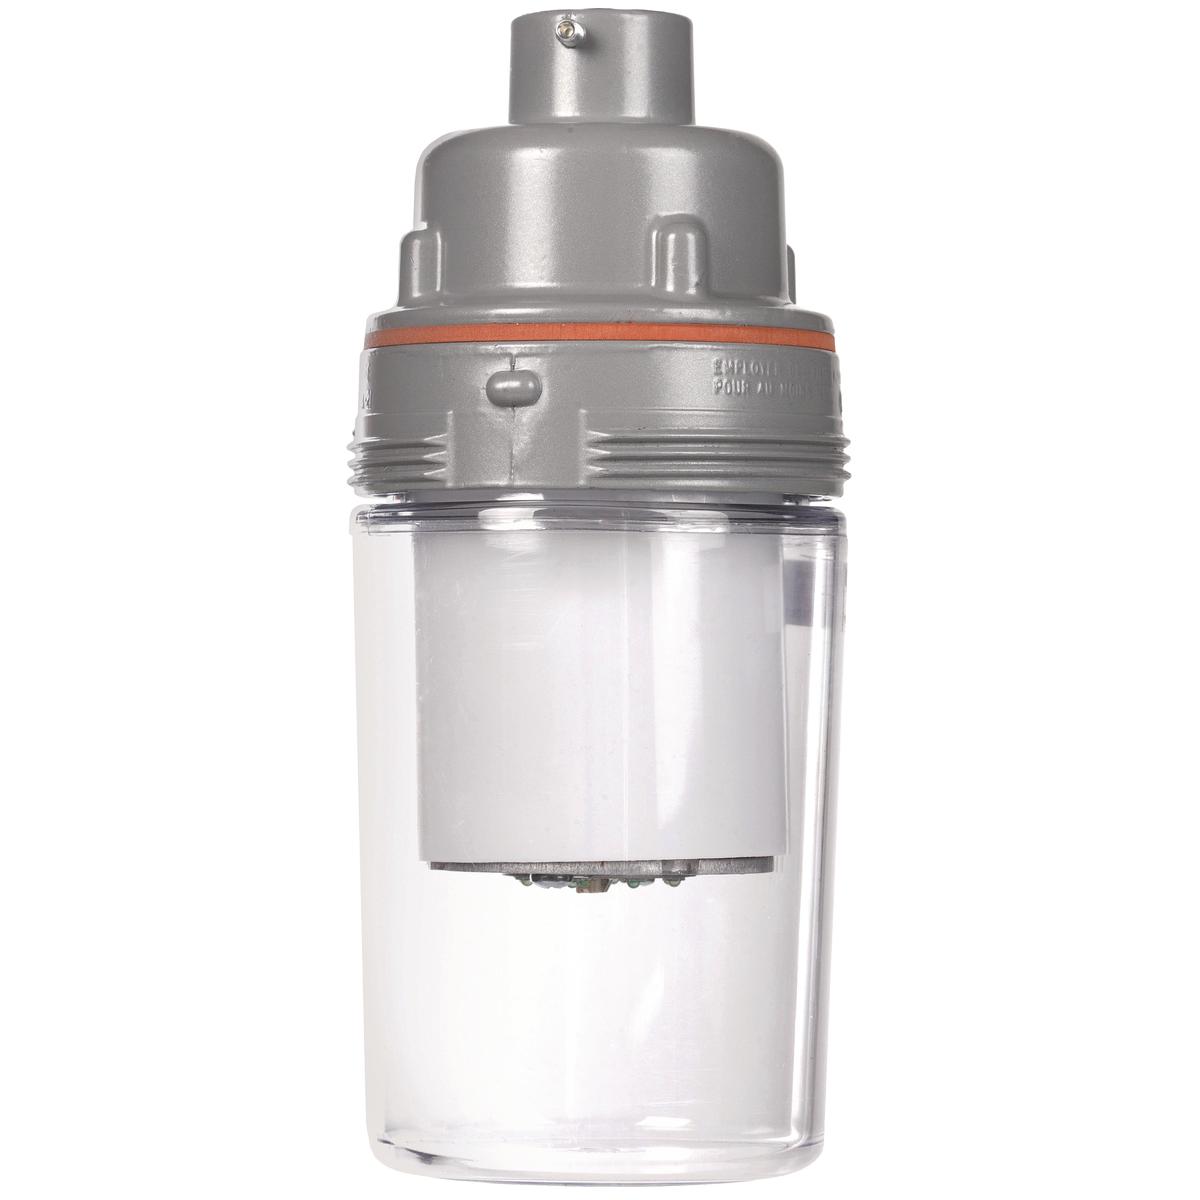 Hubbell VSL1330A1PN The VSL Series is a Vapor Tight/ Utility fixture using energy efficient LED's. This fixture is made with a cast copper-free aluminum housing and mount that is  suitable for harsh and hazardous environments. With the design of this fixtures internal heat s